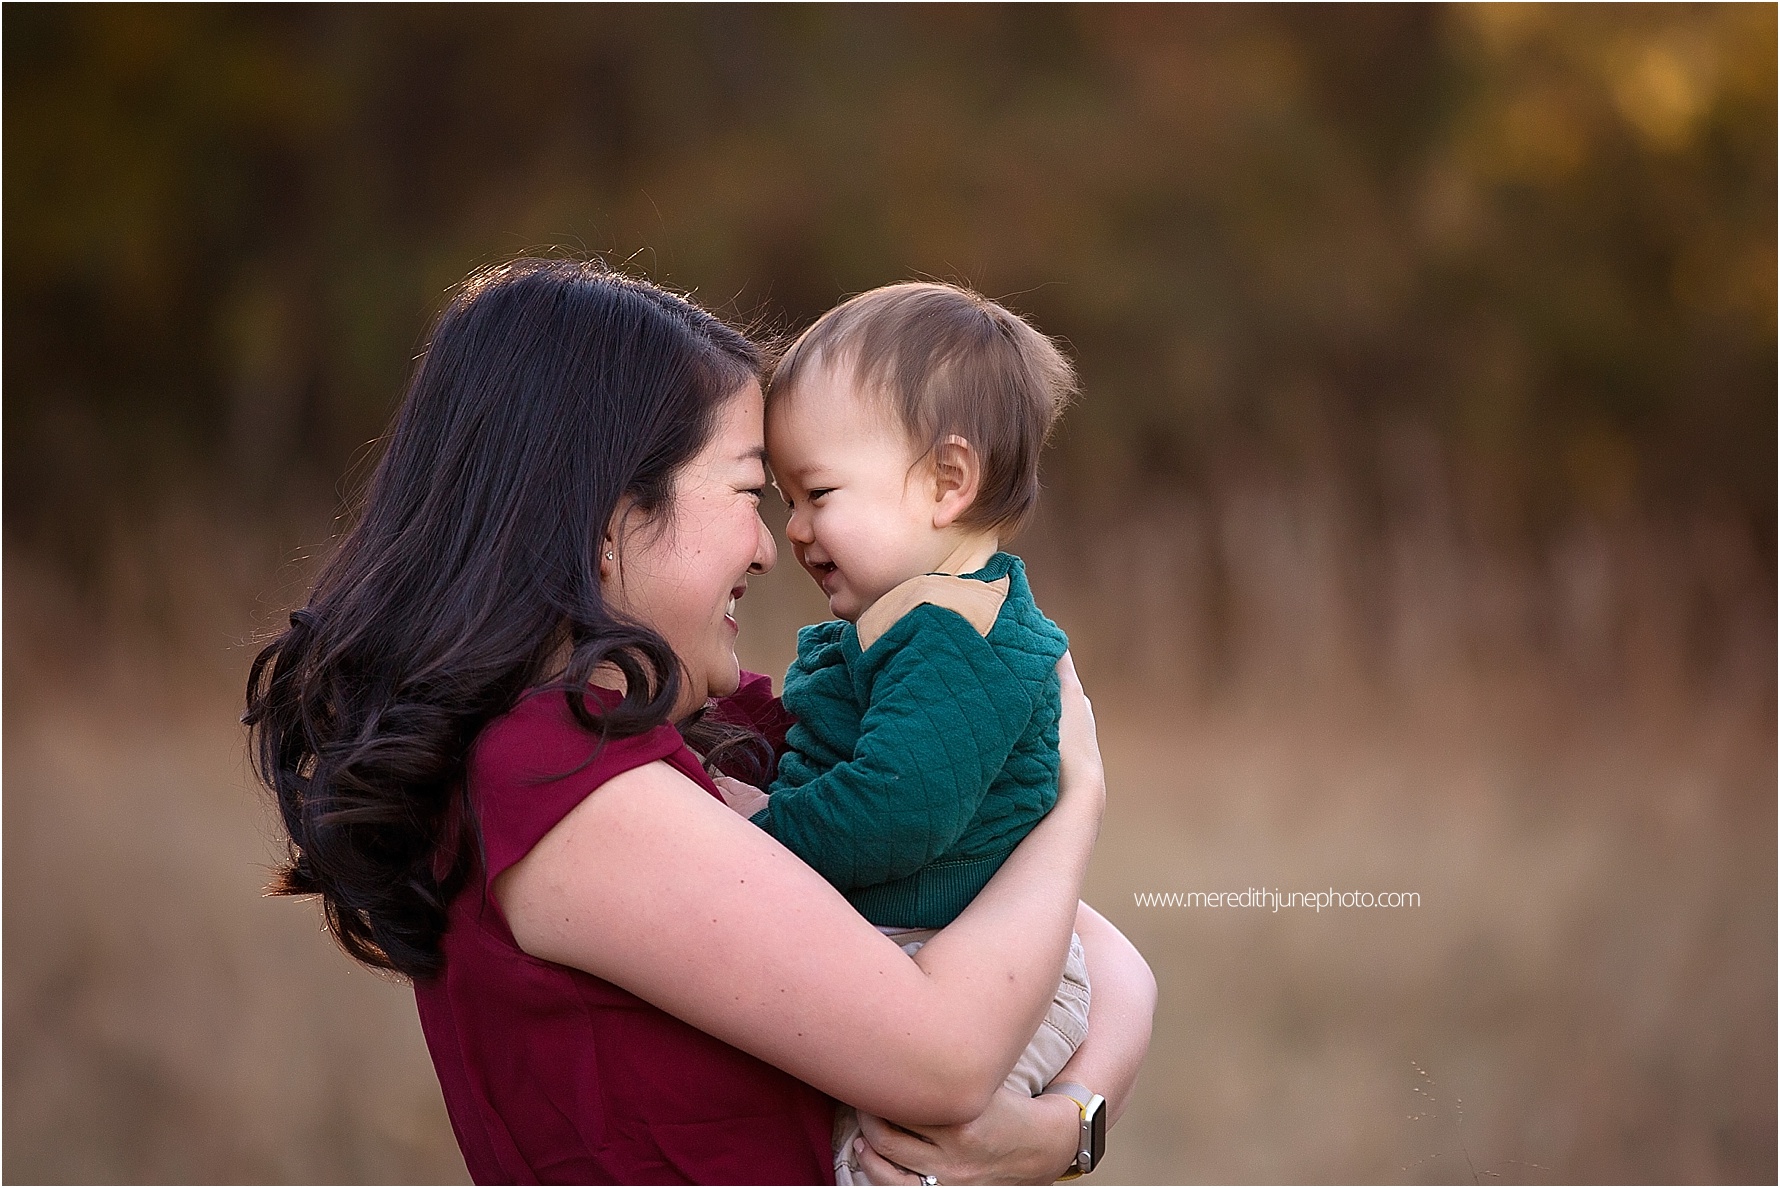 mommy and me photo ideas